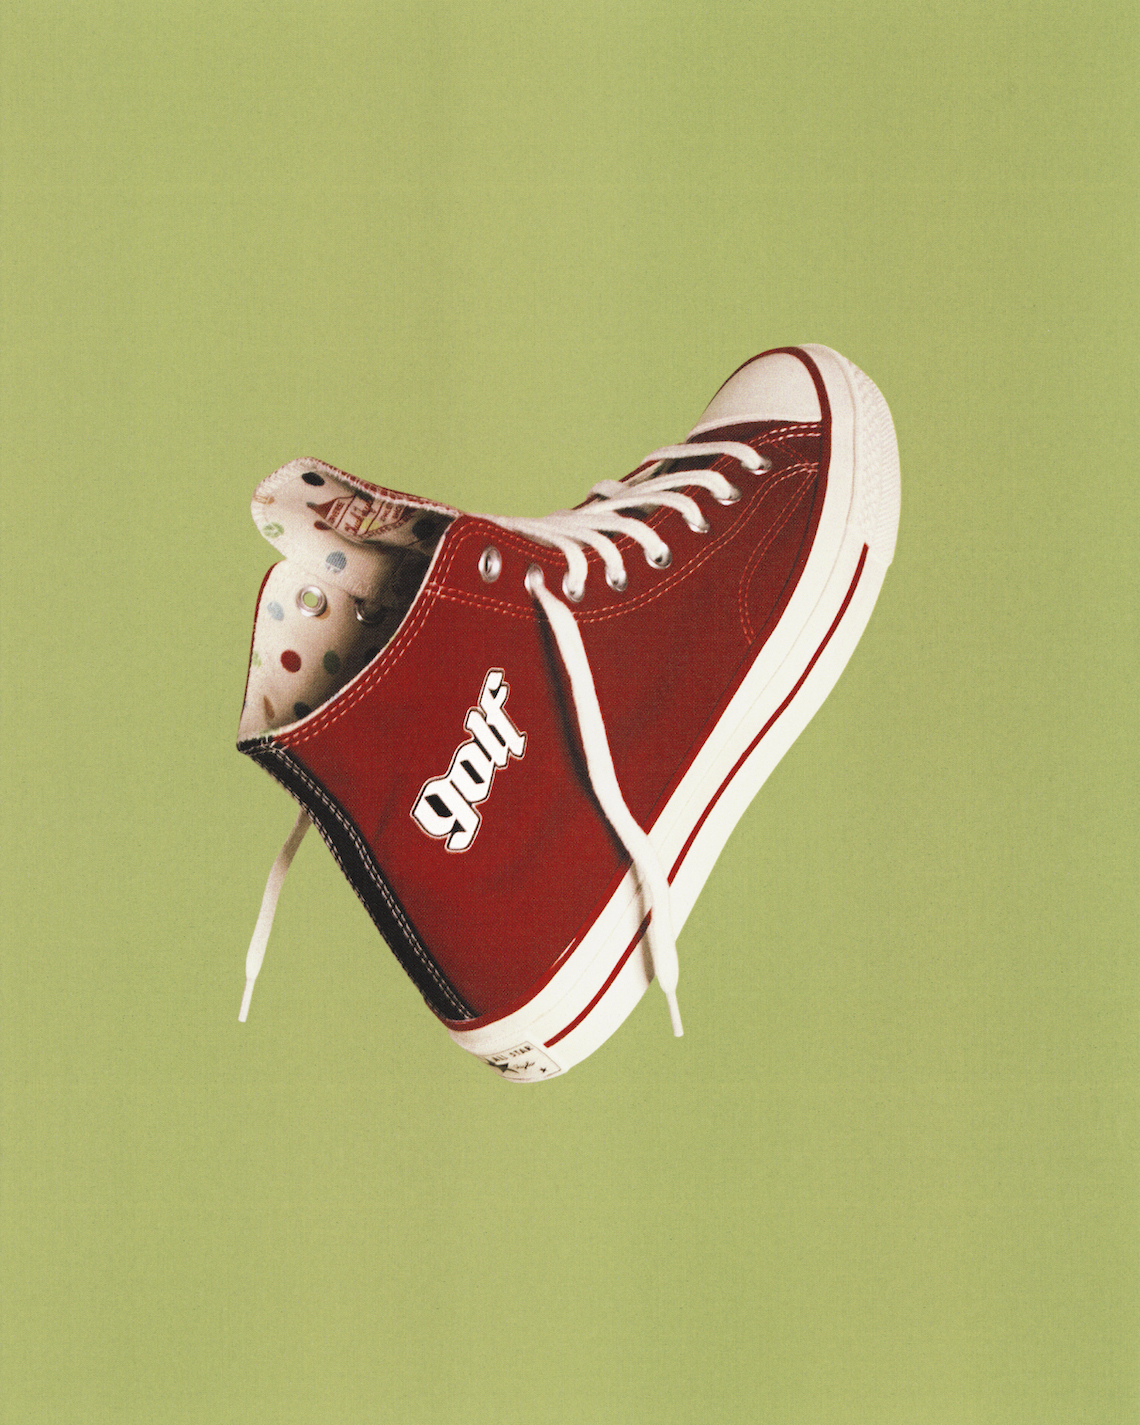 Tyler, The Creator Converse By You Golf Wang | SneakerNews.com